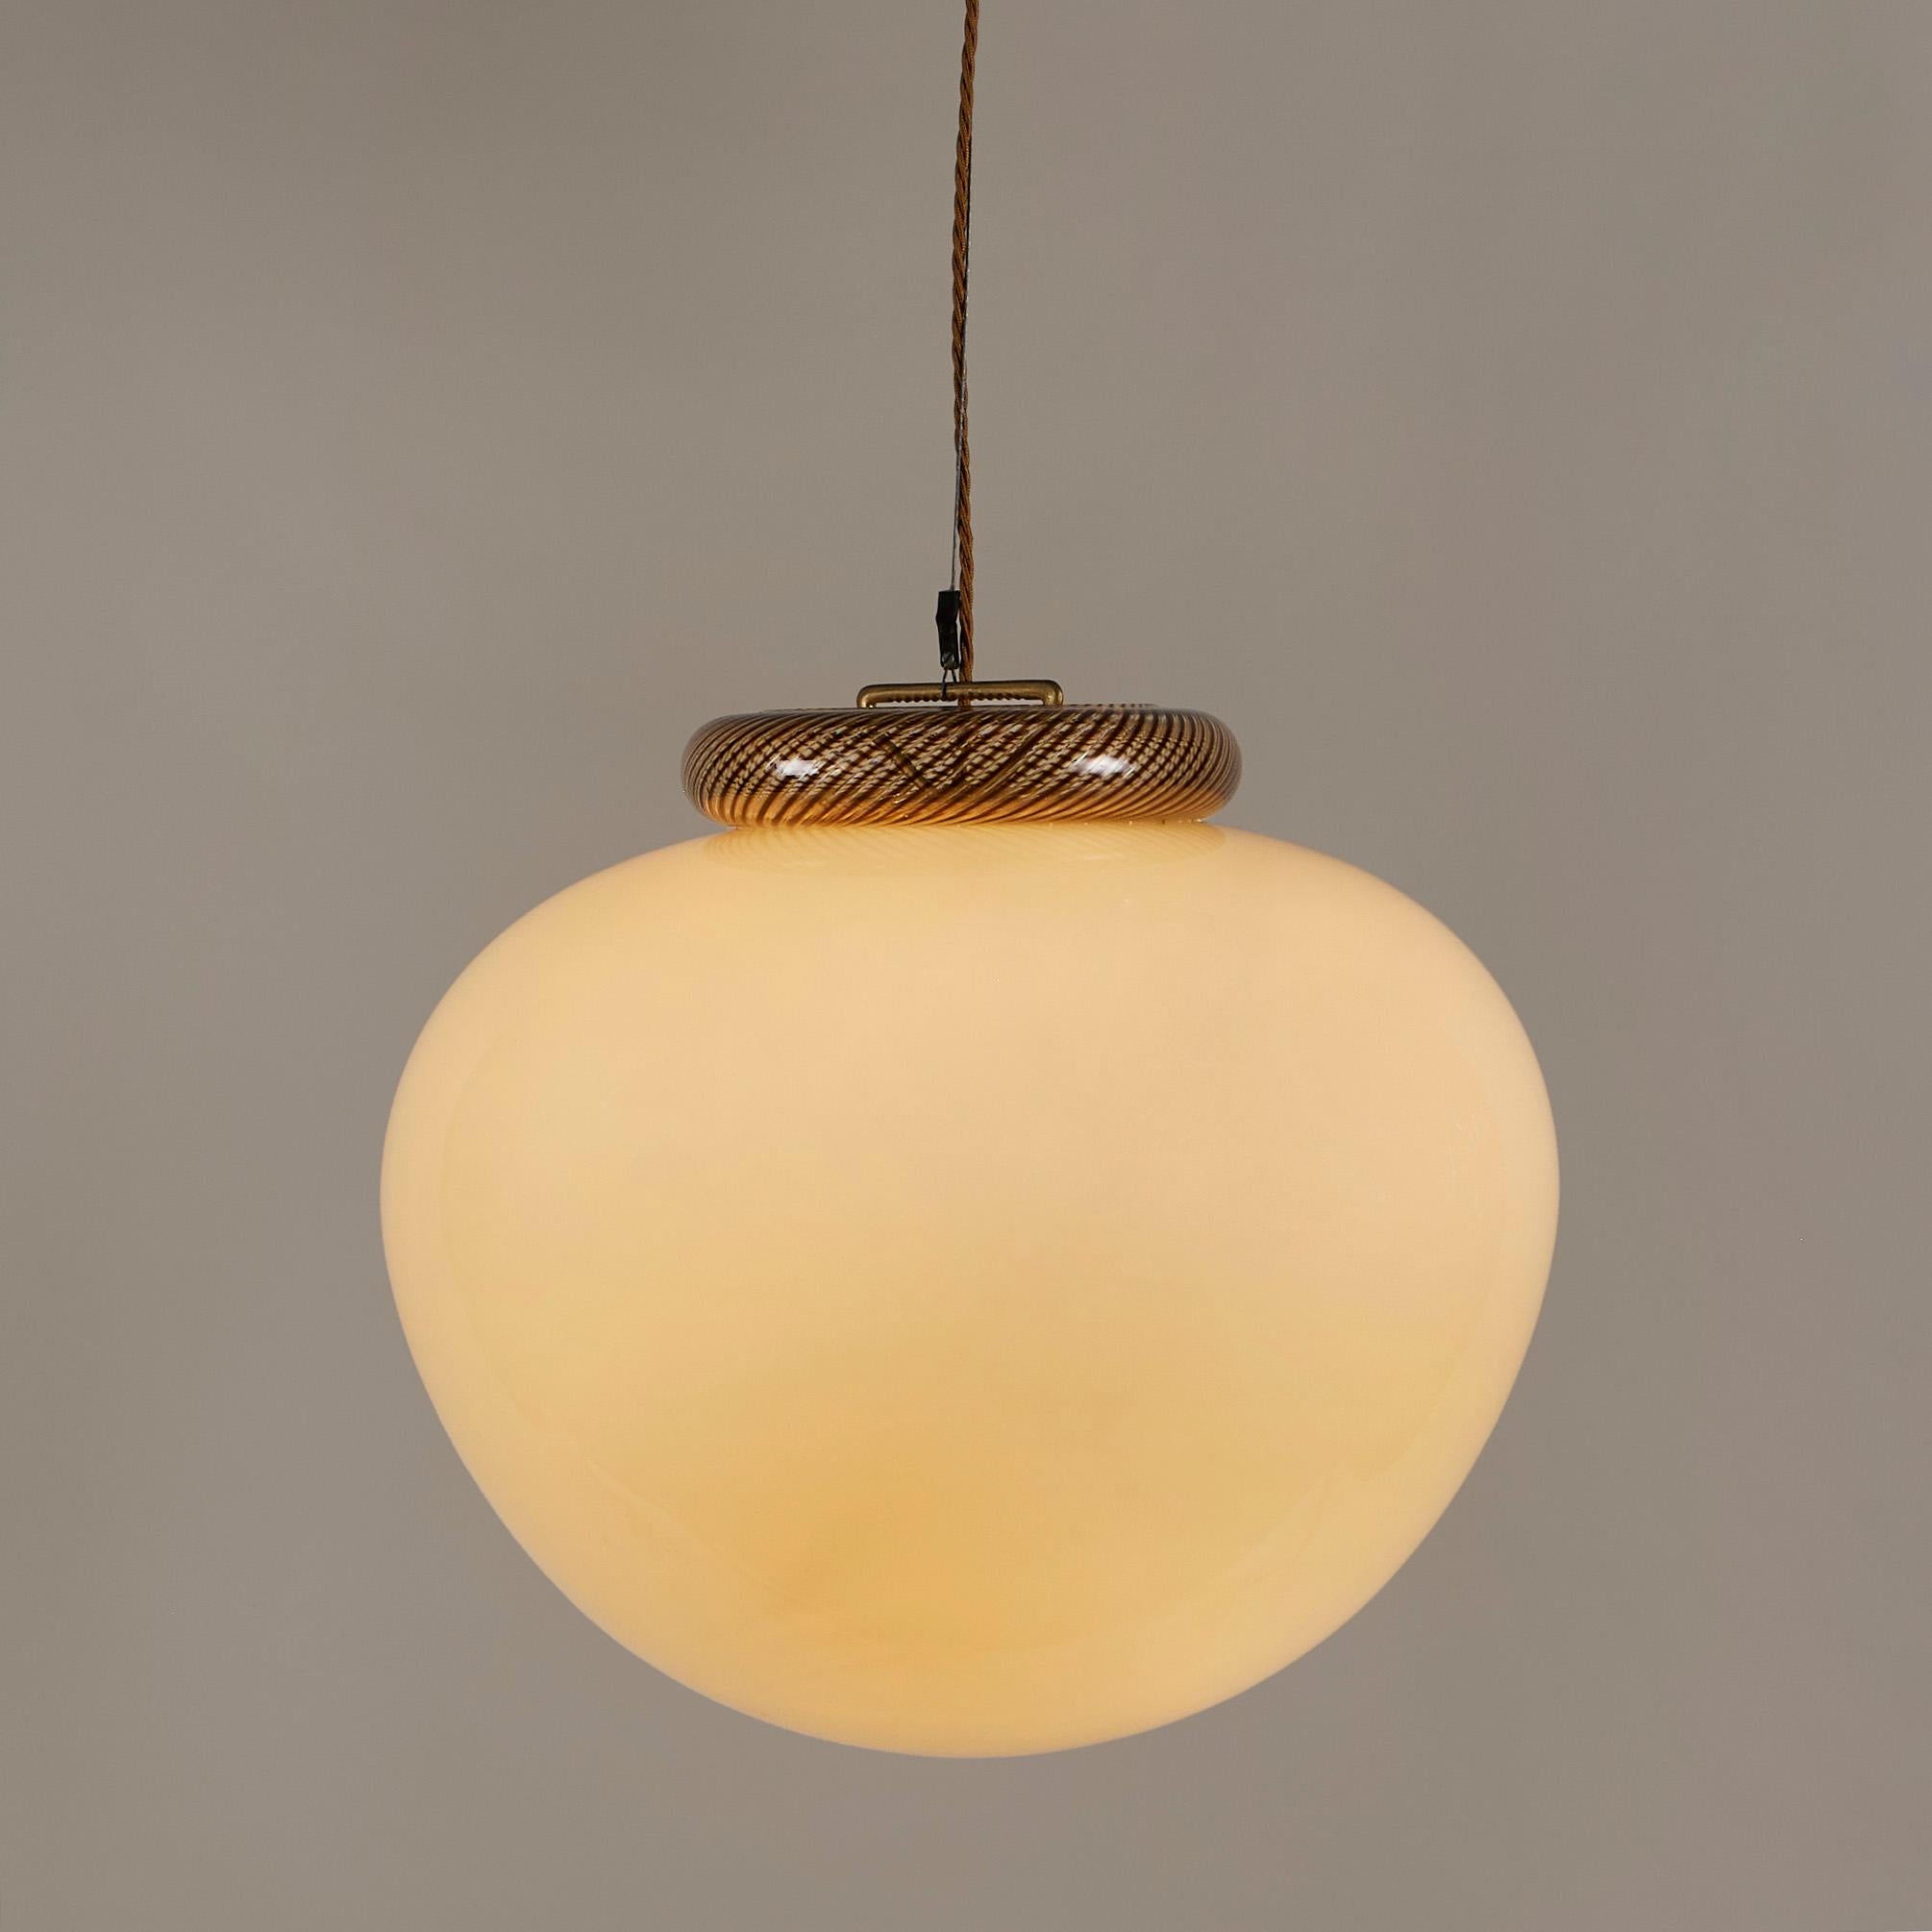 Substantial pendant in rich cream Murano glass with shaped clear and amber swirl top.